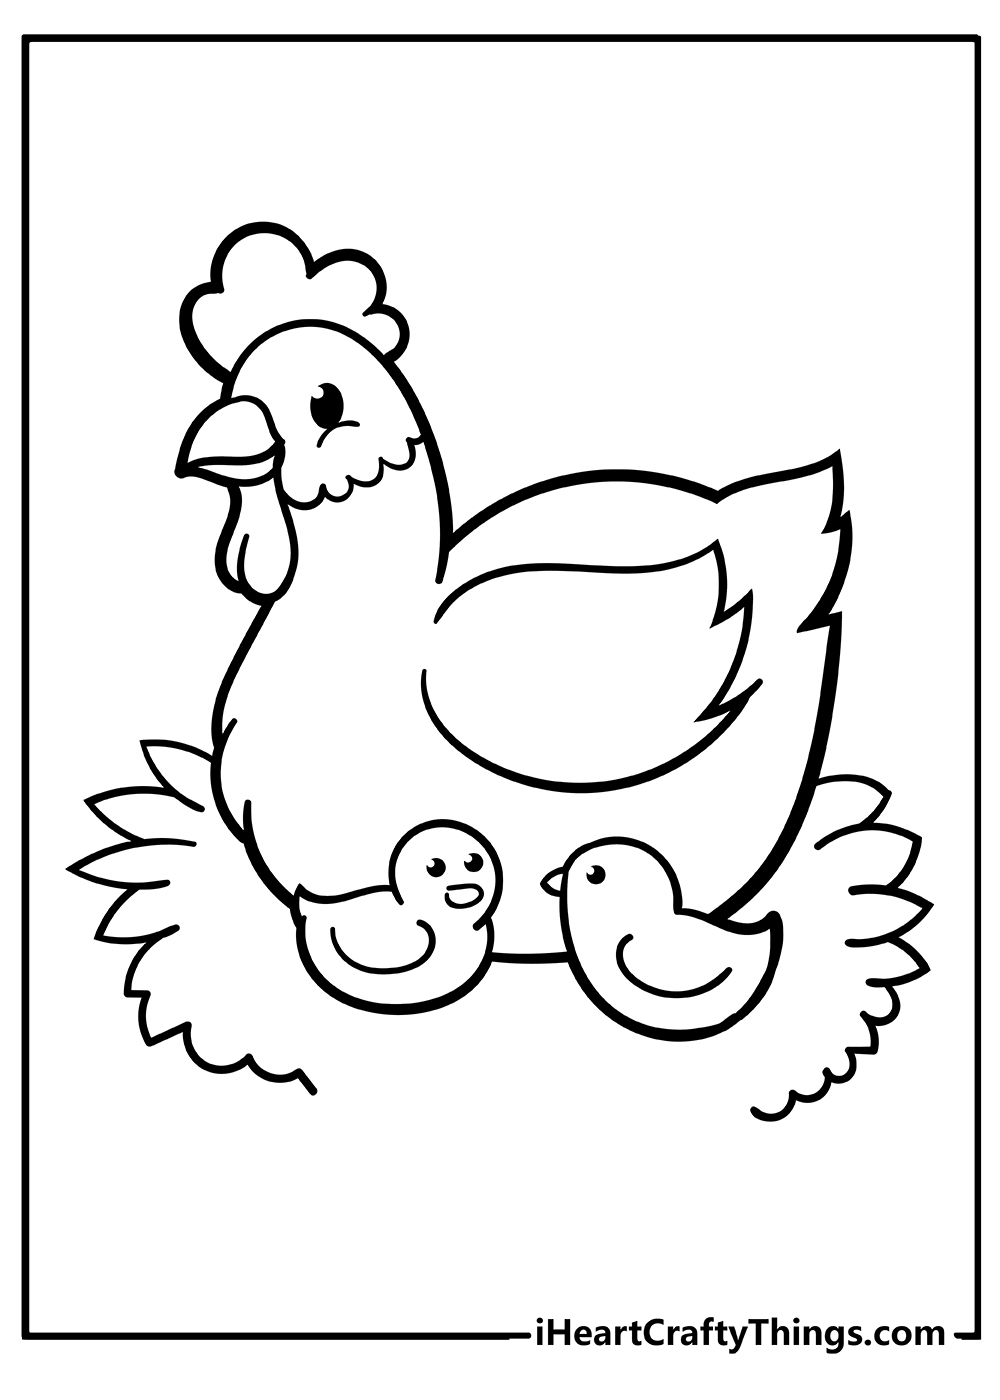 Farm Animal Coloring Sheet for children free download